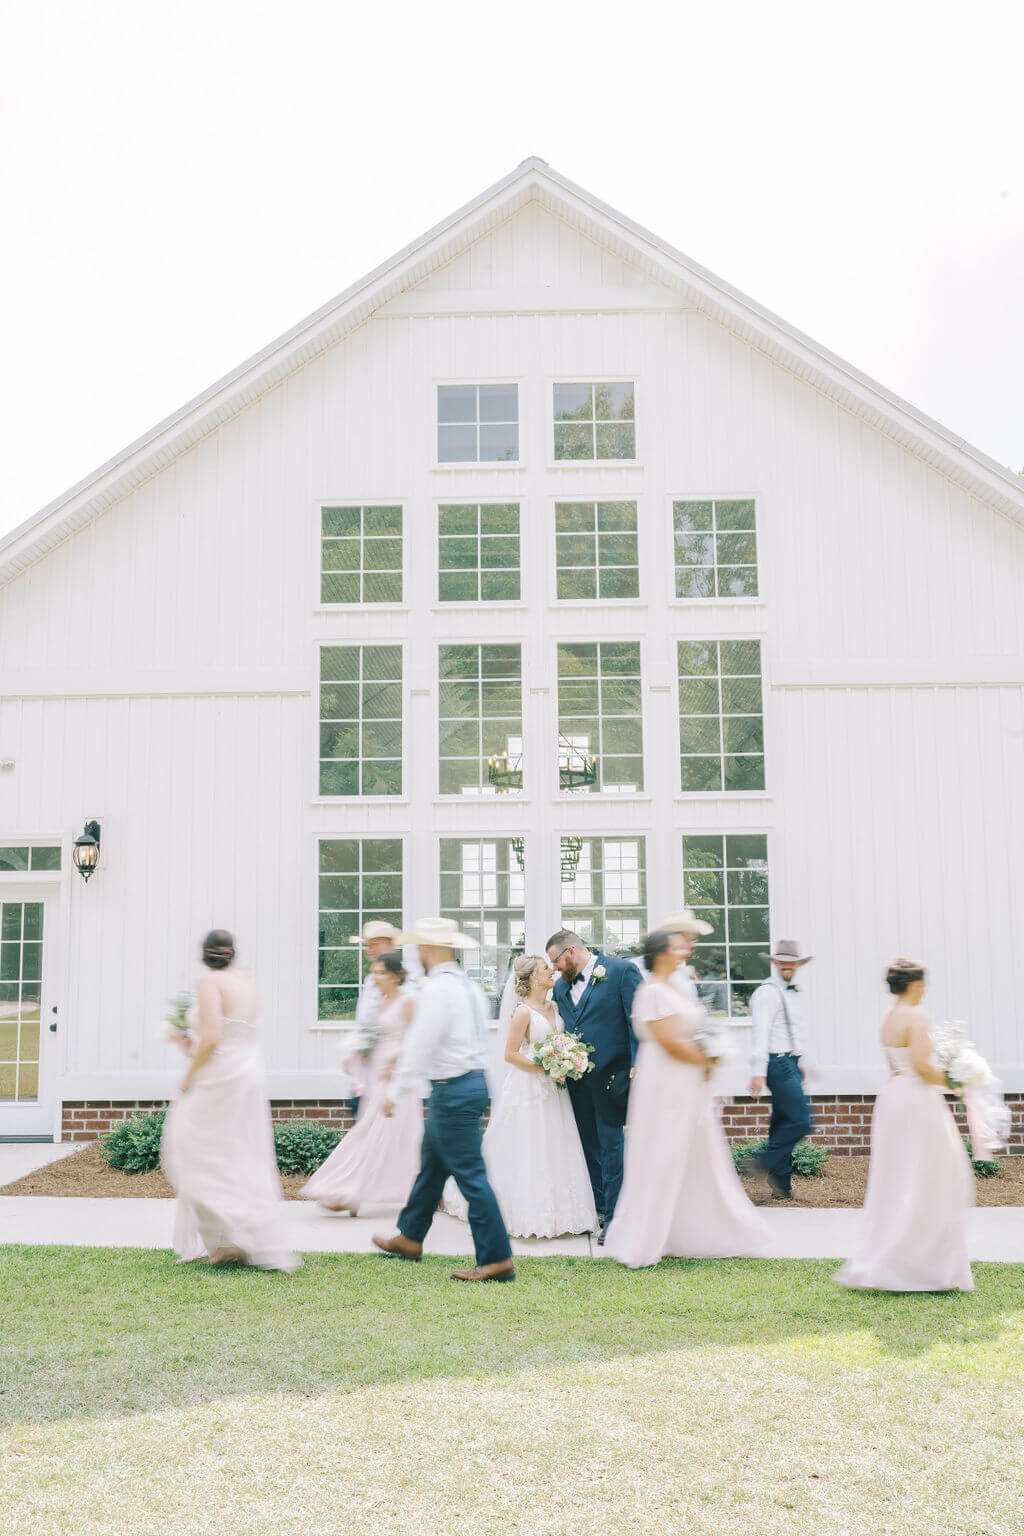 Couple kissing while wedding party walks around them blurred